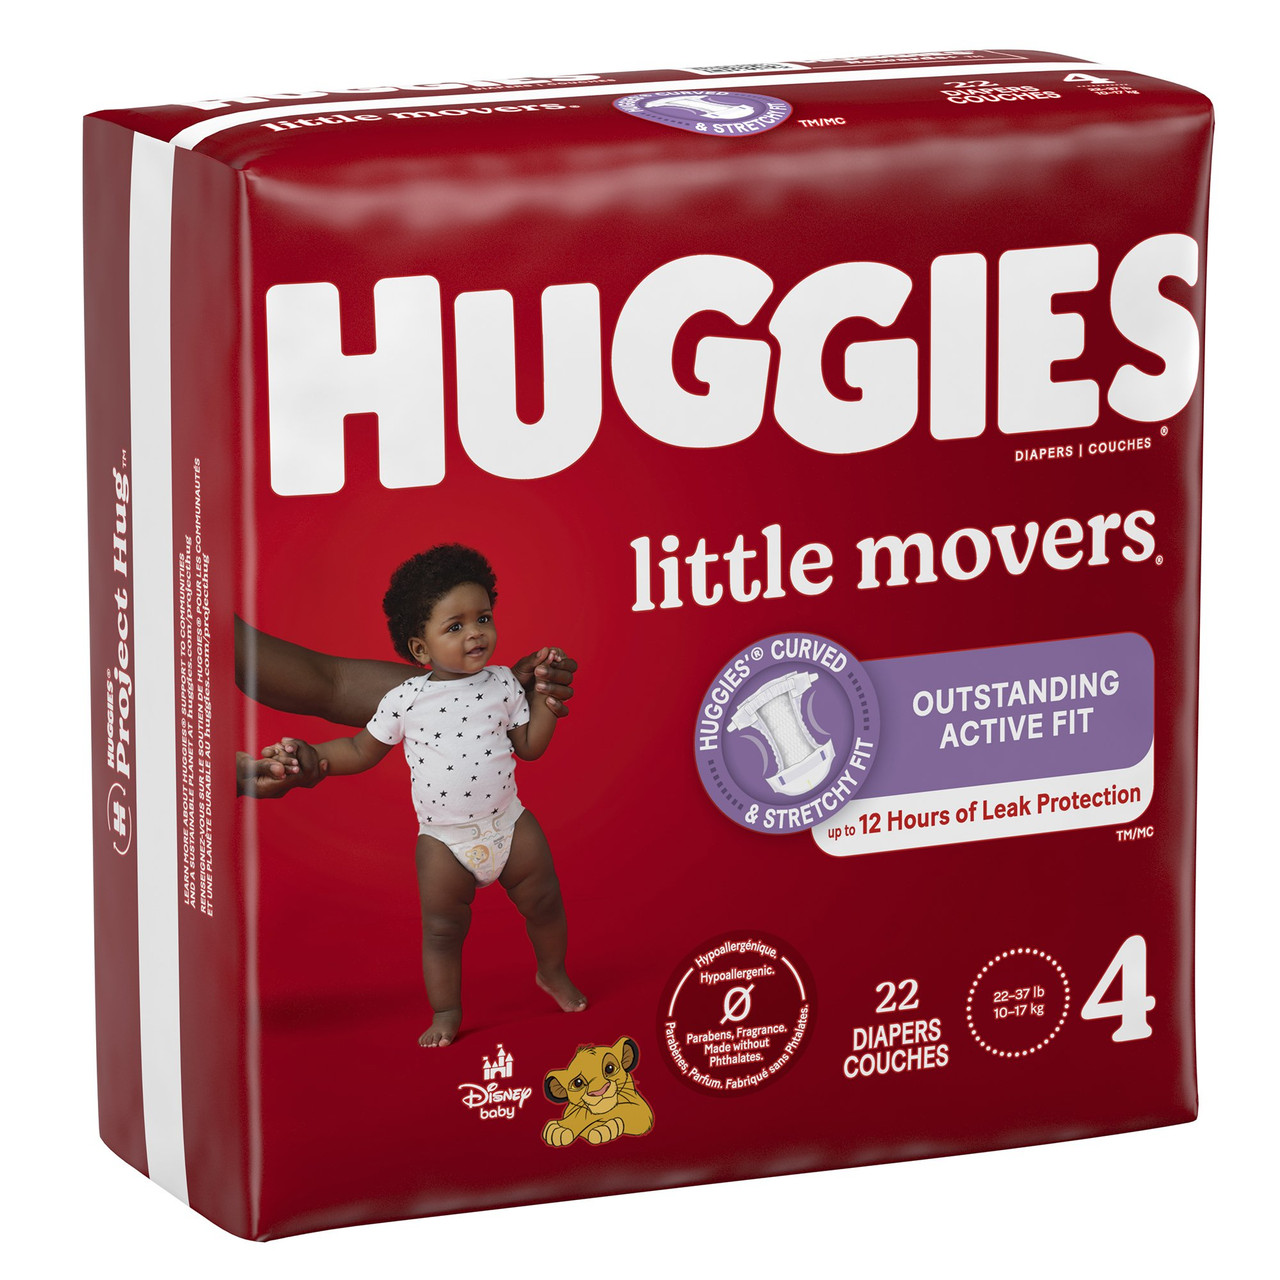 Premature baby nappies: Huggies have designed a necessary nappy.